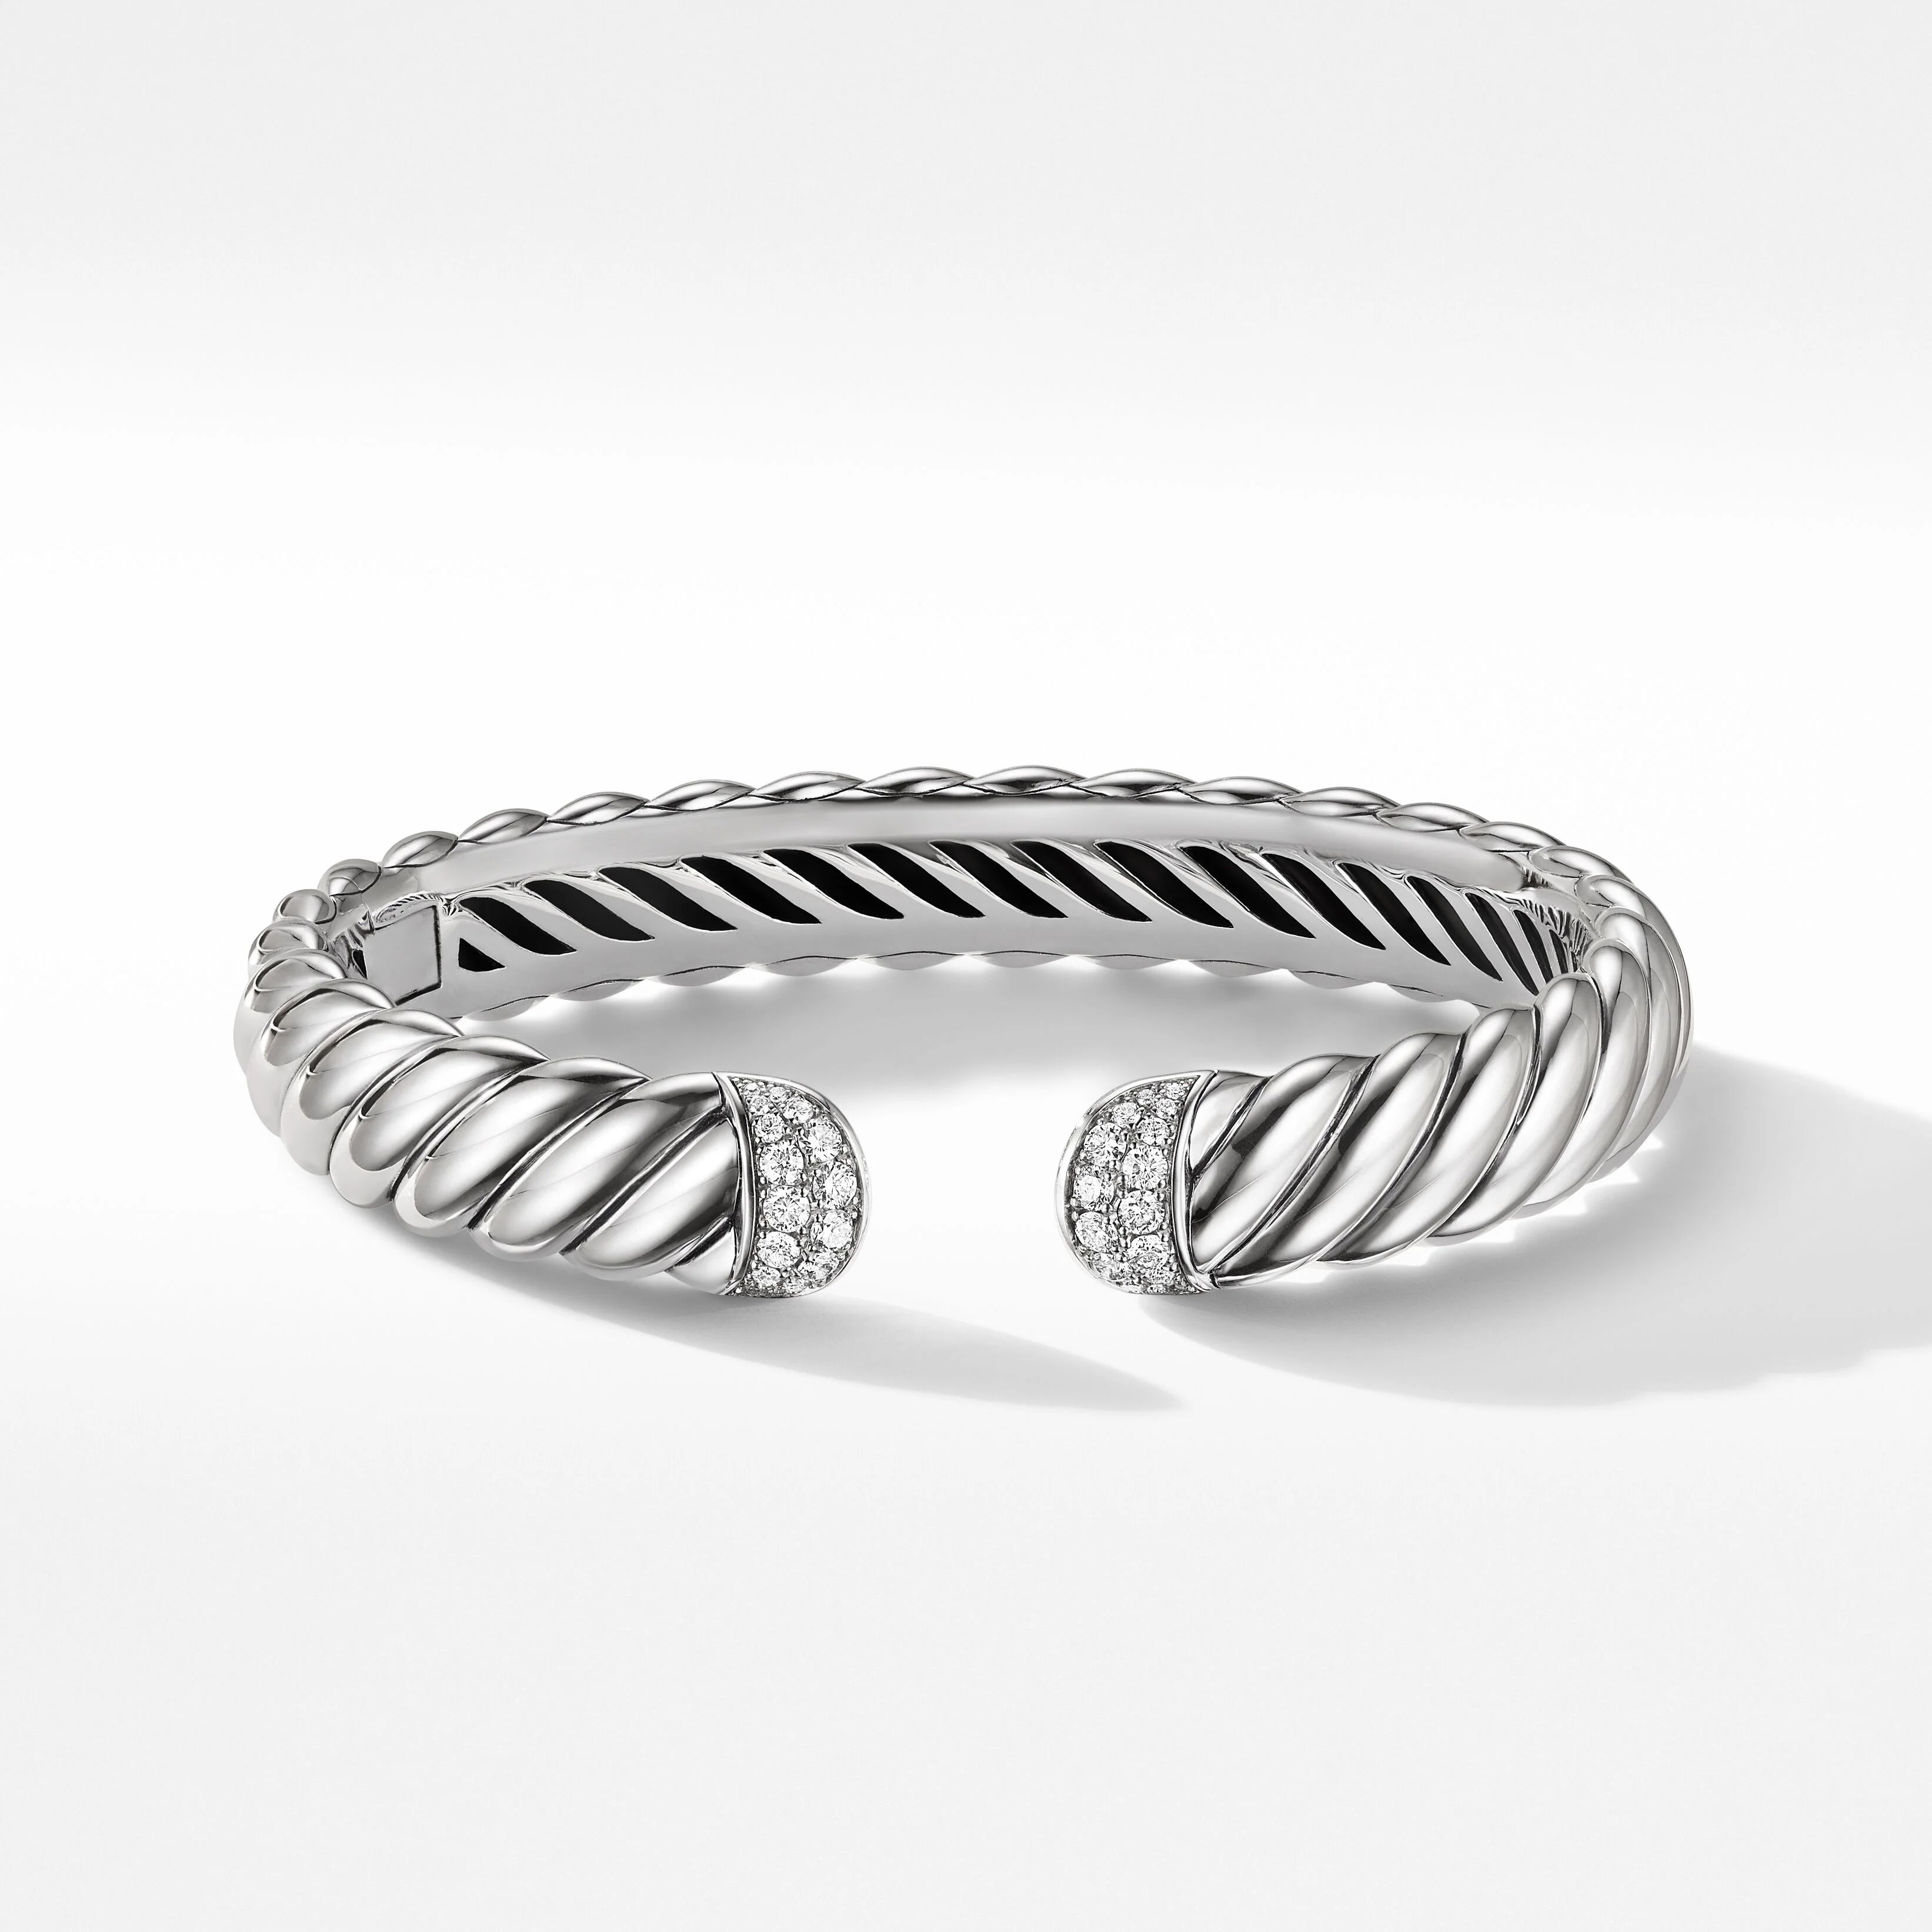 Sculpted Cable Cuff Bracelet in Sterling Silver with Pavé Diamonds | David Yurman